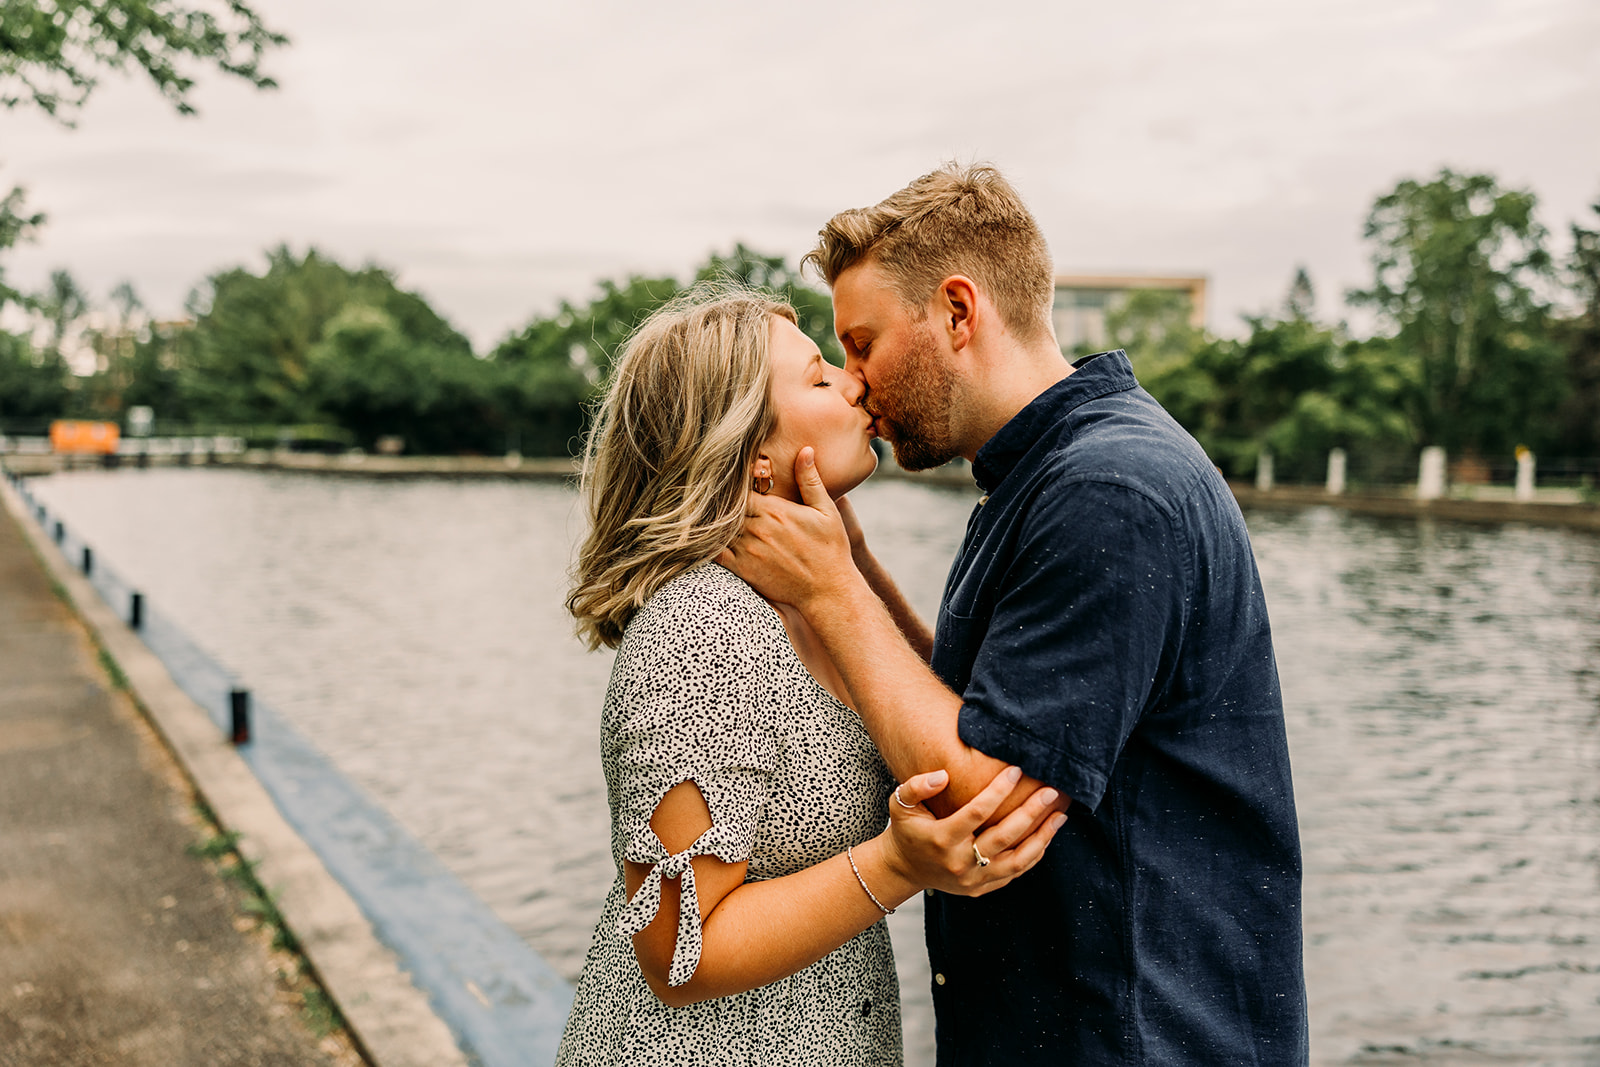 Whimsical engagement session captures the couple's chemistry in the field